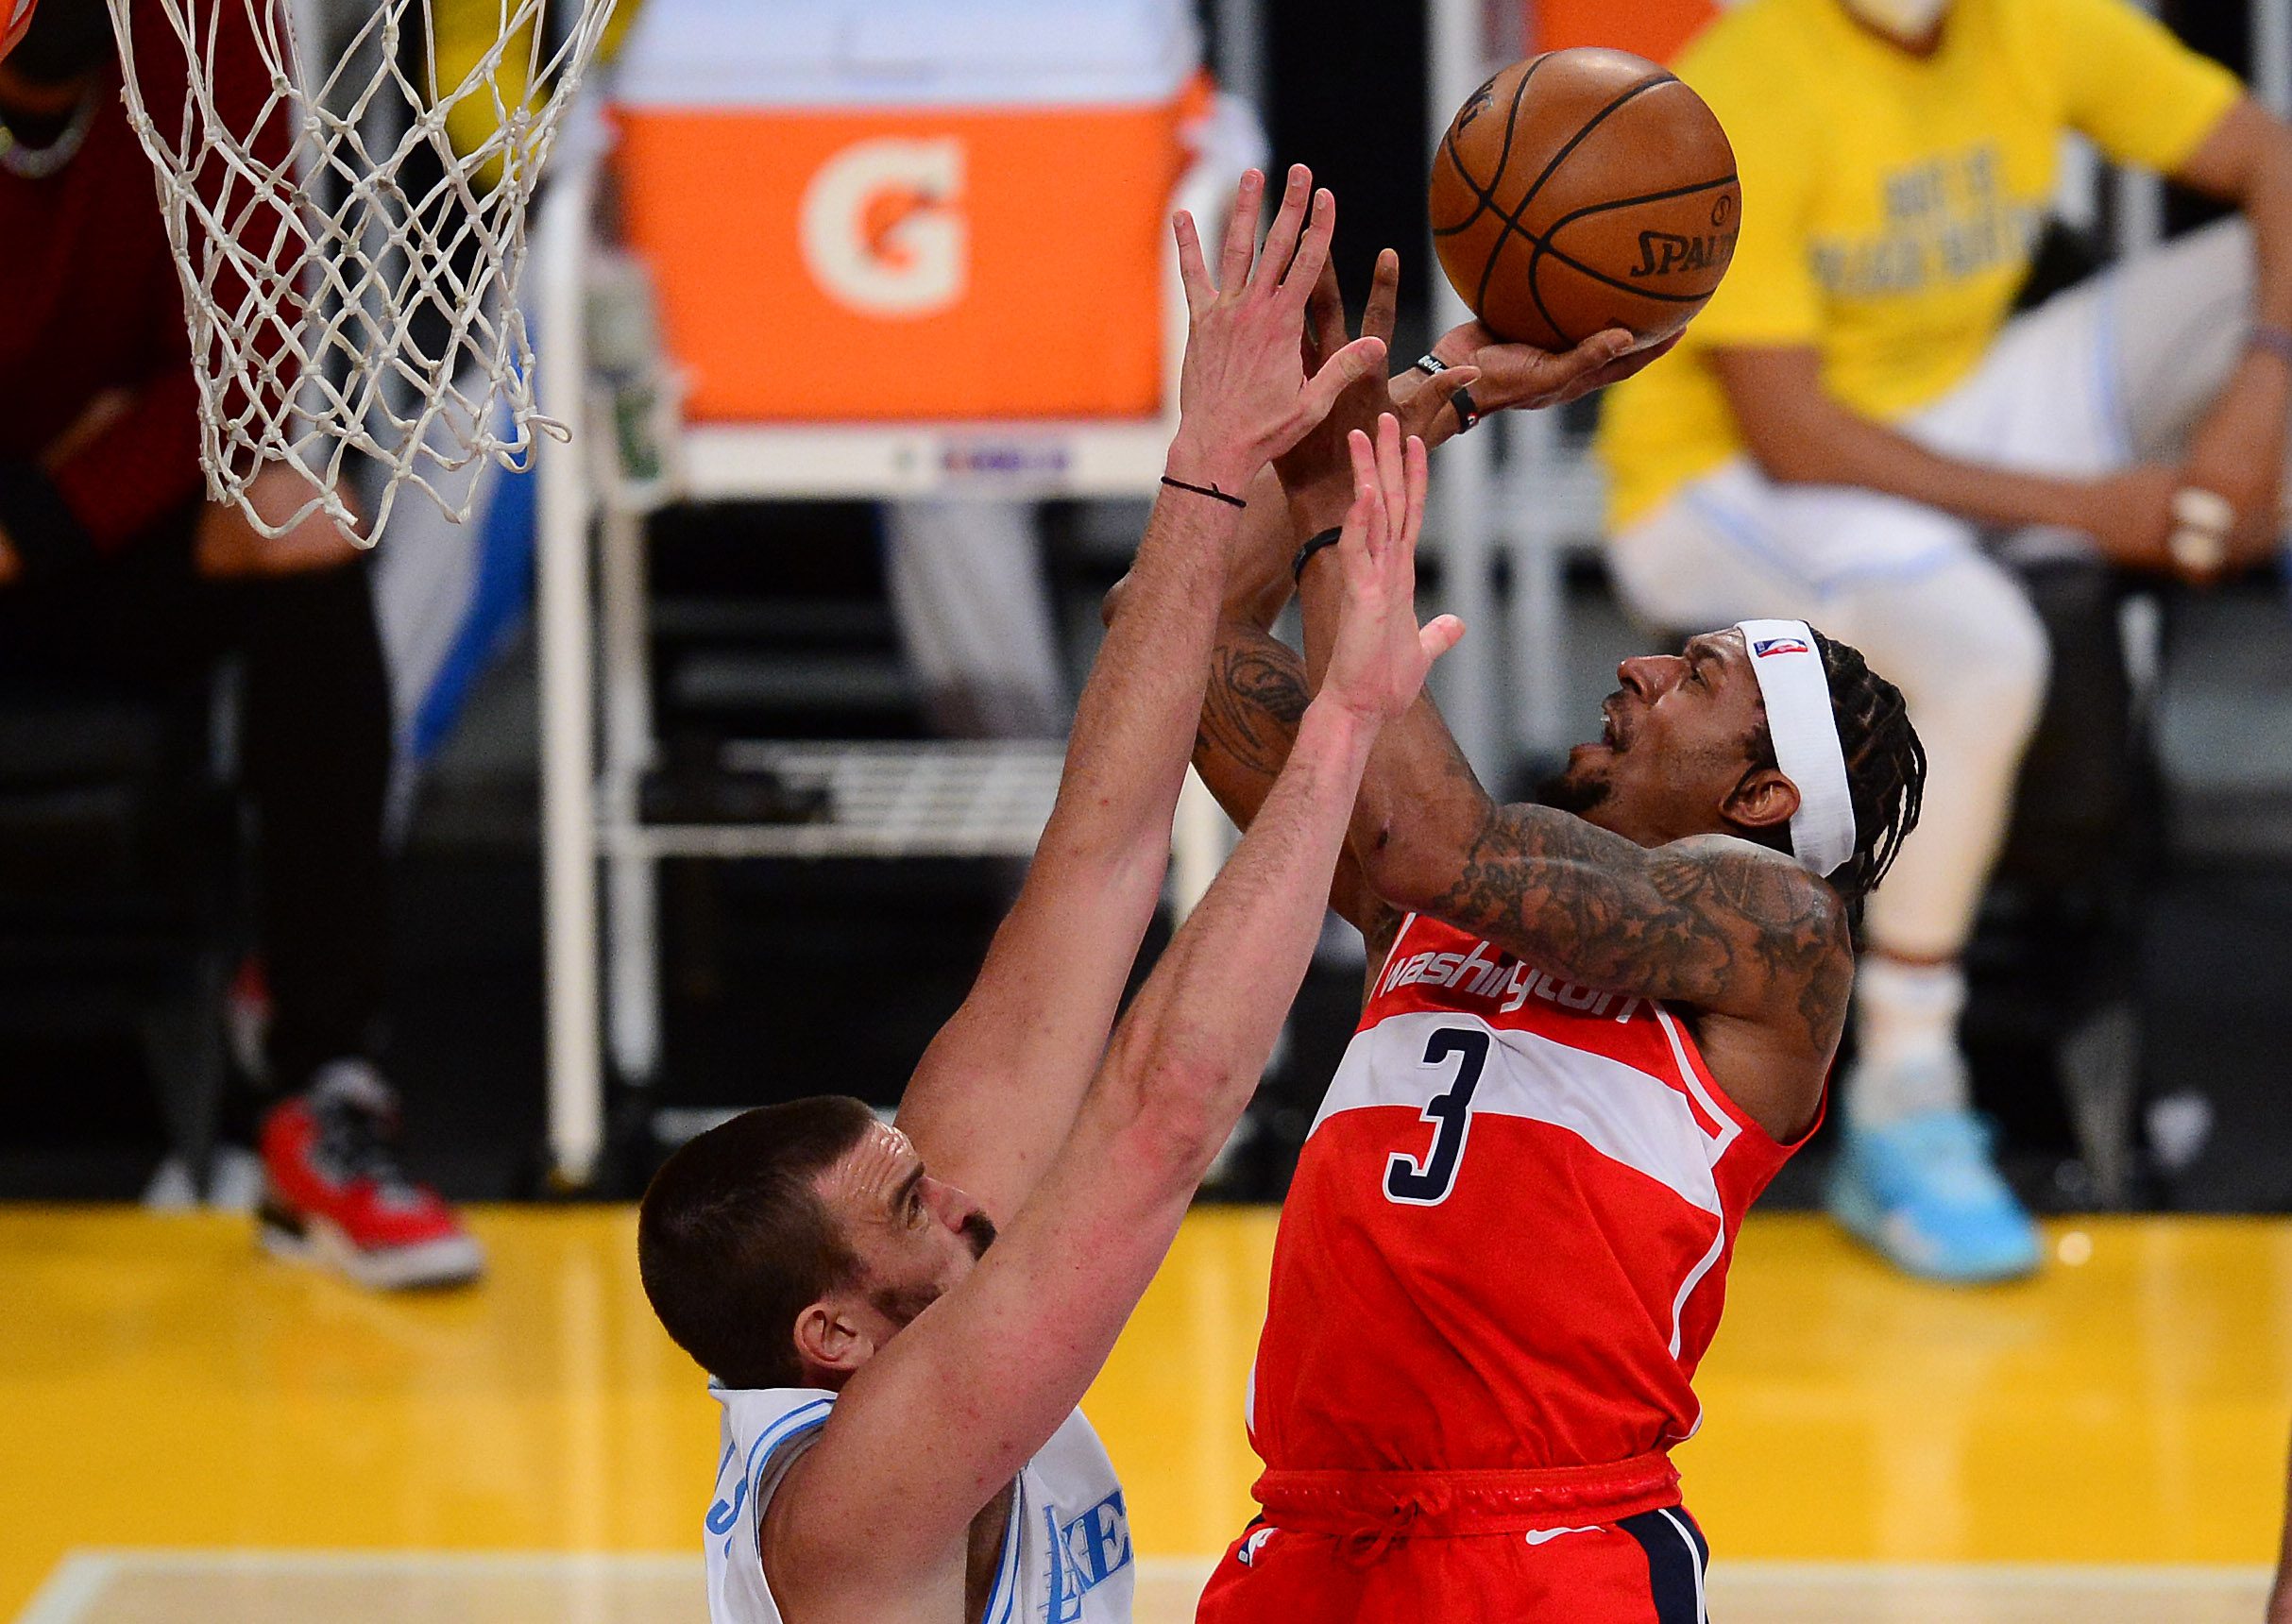 Phoenix Suns to acquire Wizards' Bradley Beal in blockbuster trade: report